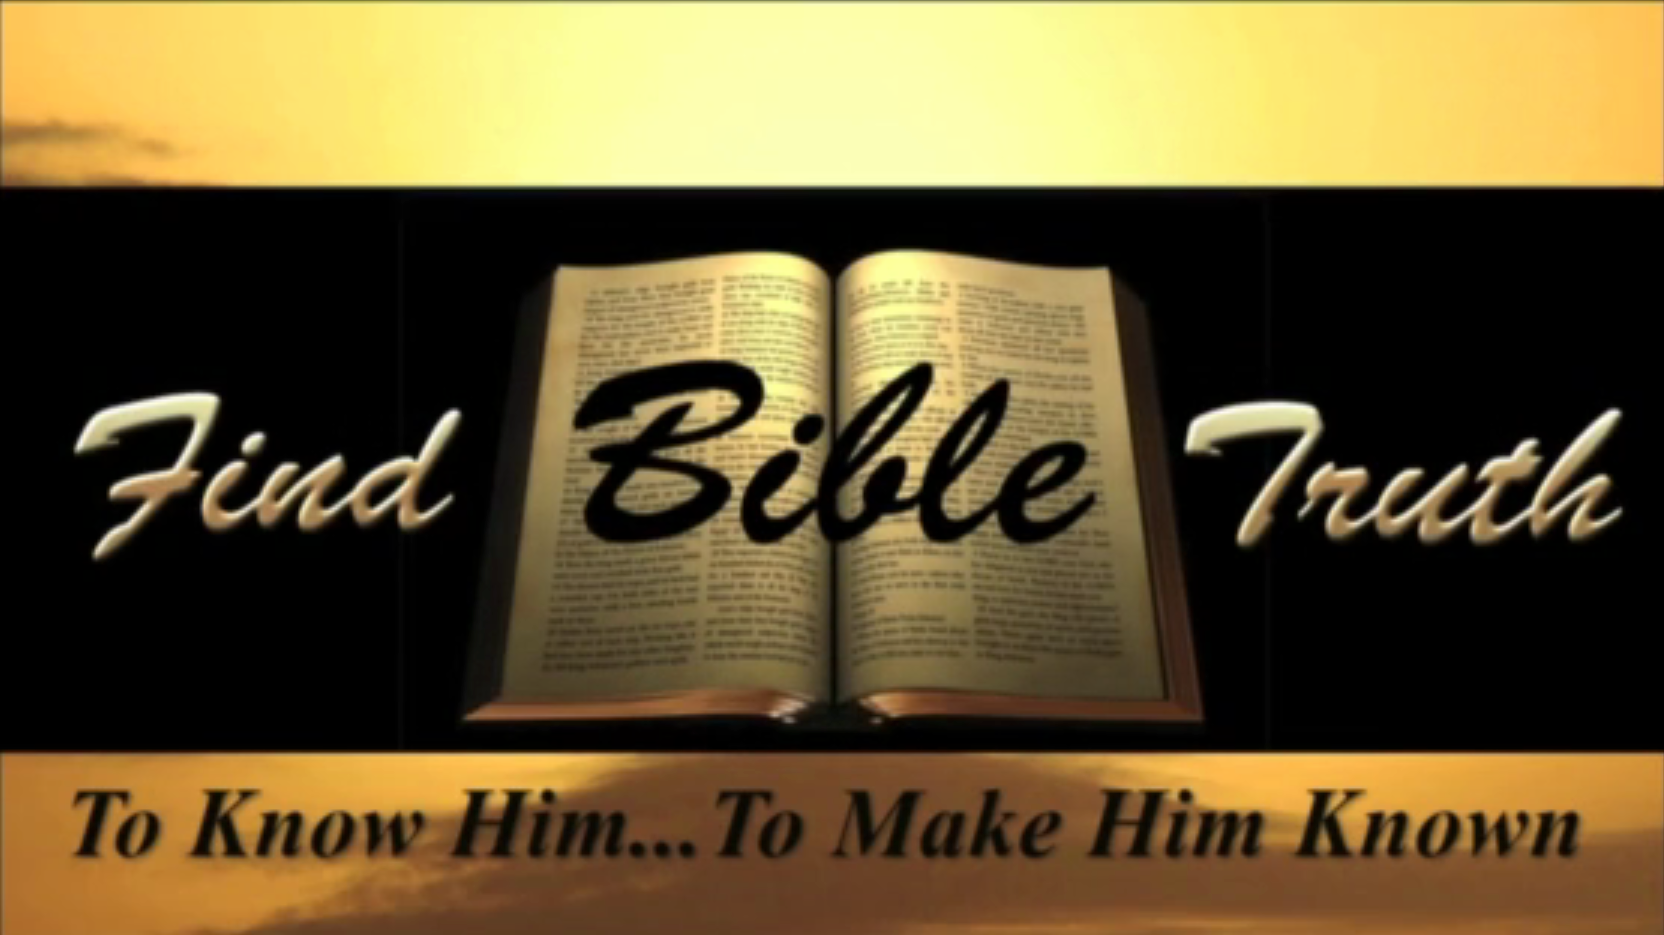 Find Bible Truth